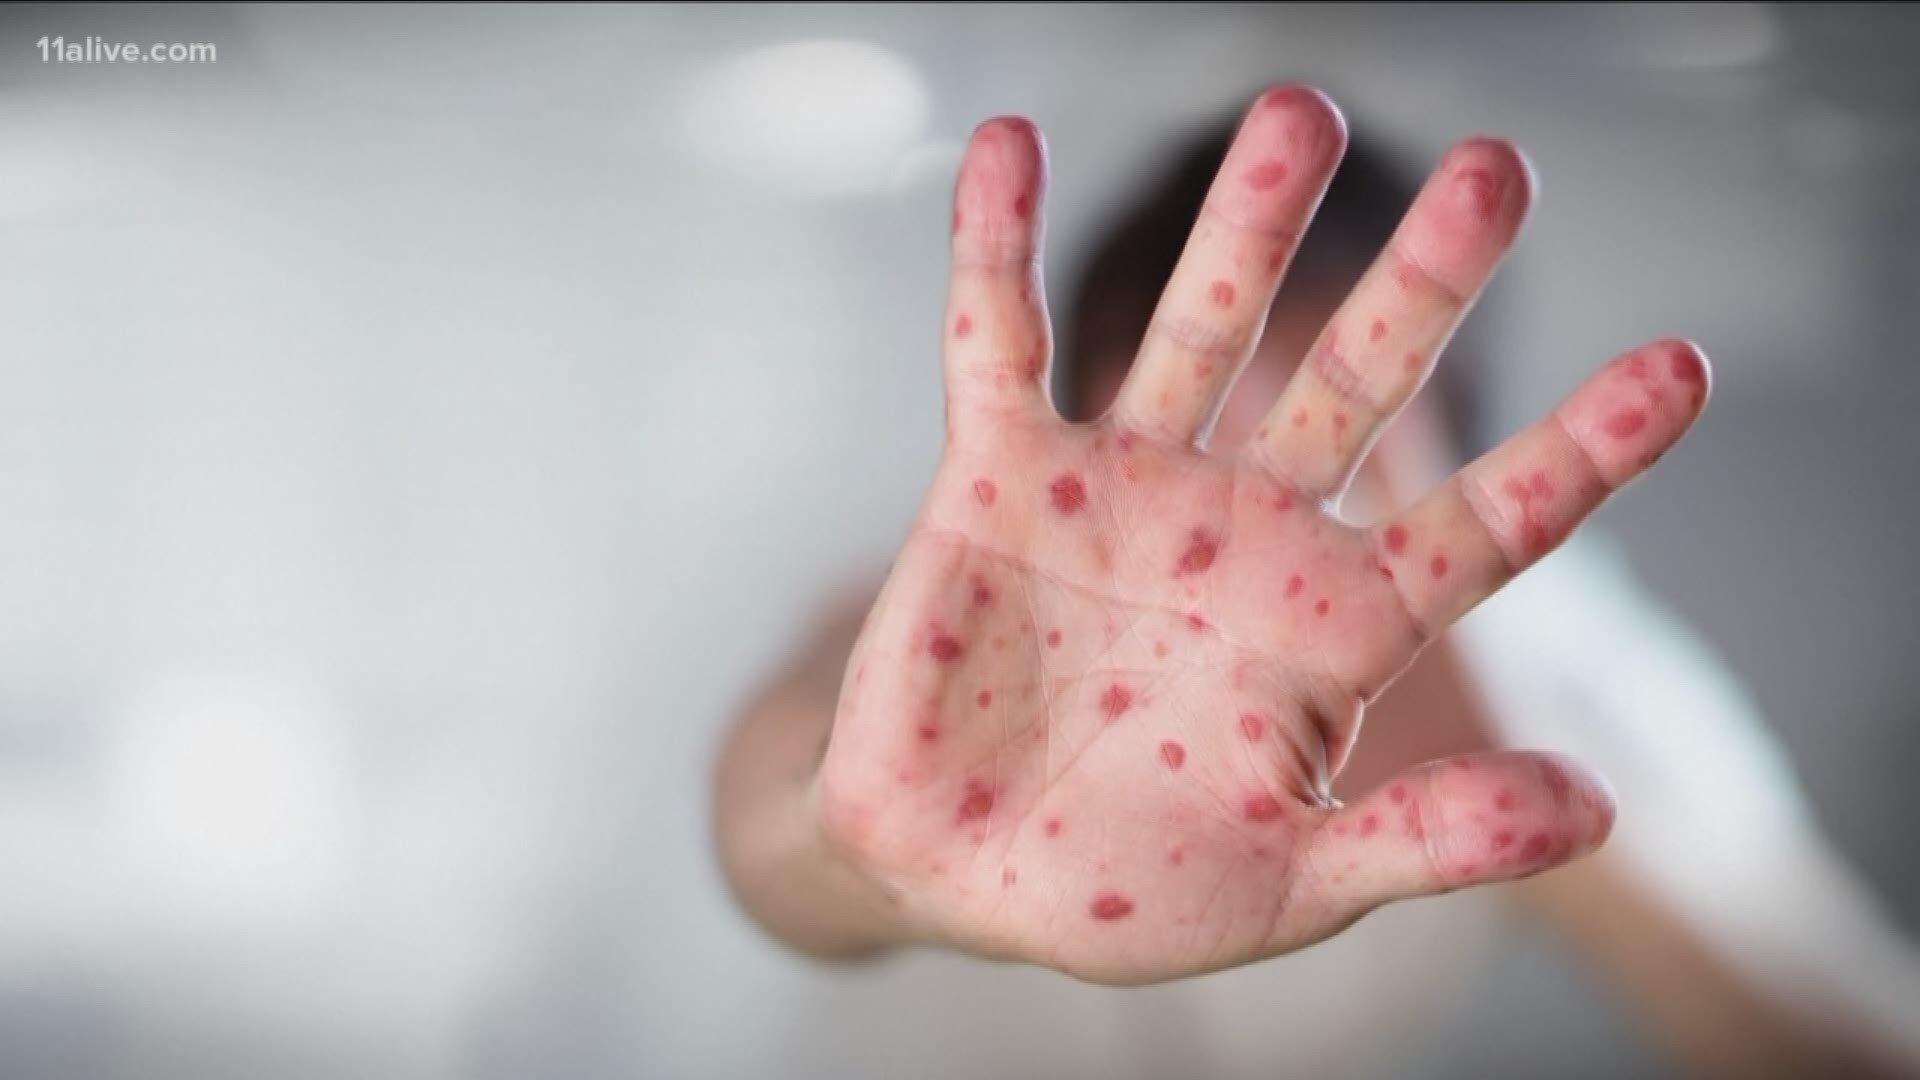 The numbers show 101 cases of measles in 2019 so far.